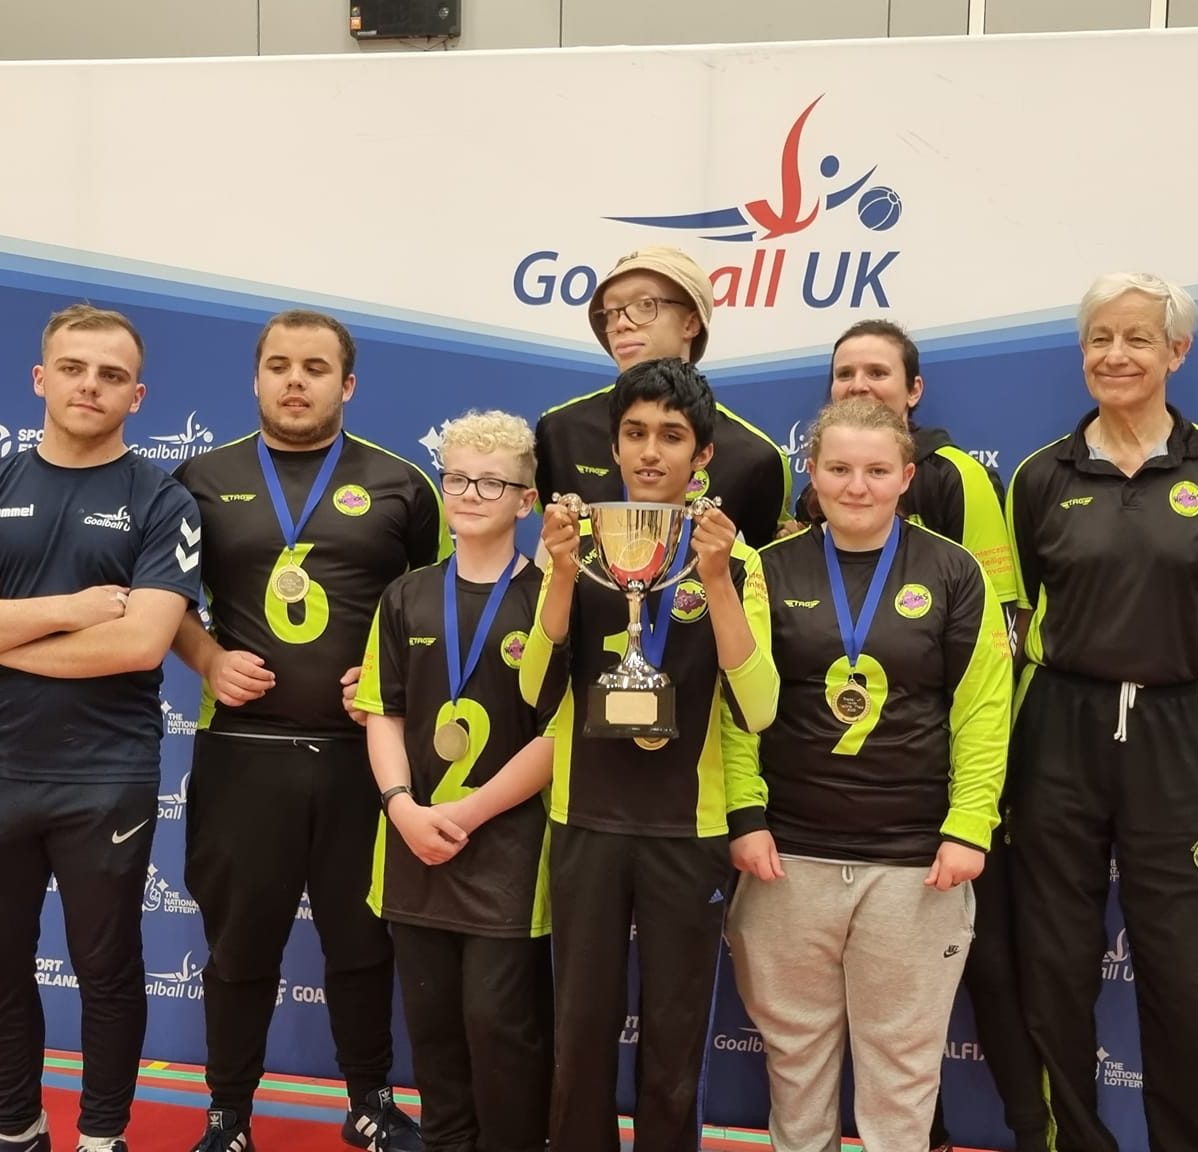 Daniel is stood at the front of a team photo holding a trophy. There are seven other Croysutt Warriors around Daniel. They are stood infront of a Goalball UK banner